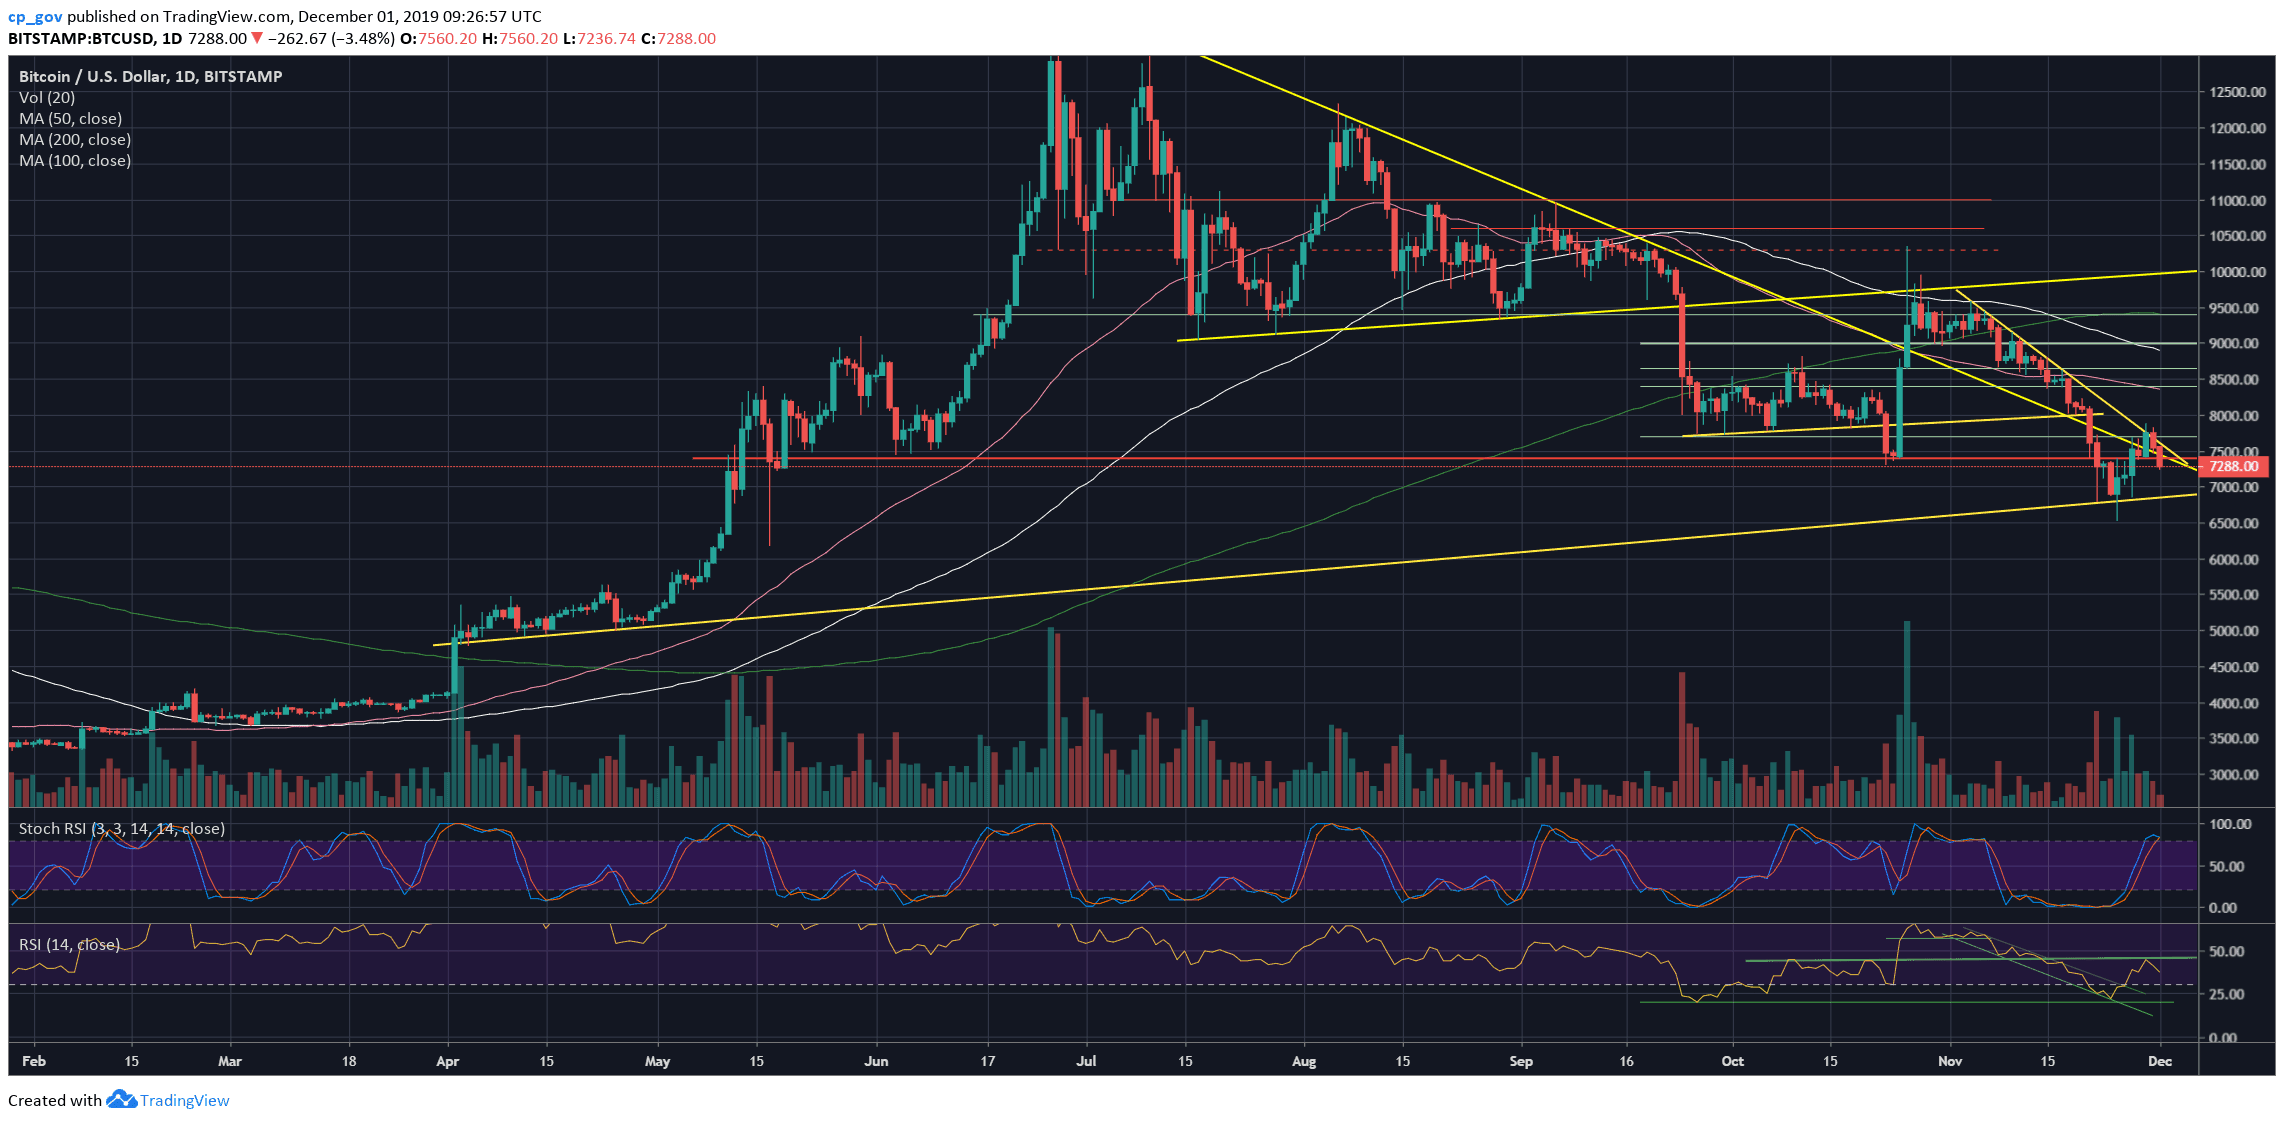 Bitcoin Price Analysis: November’s Candle Ended Very Bearish, What Does It Mean For December?